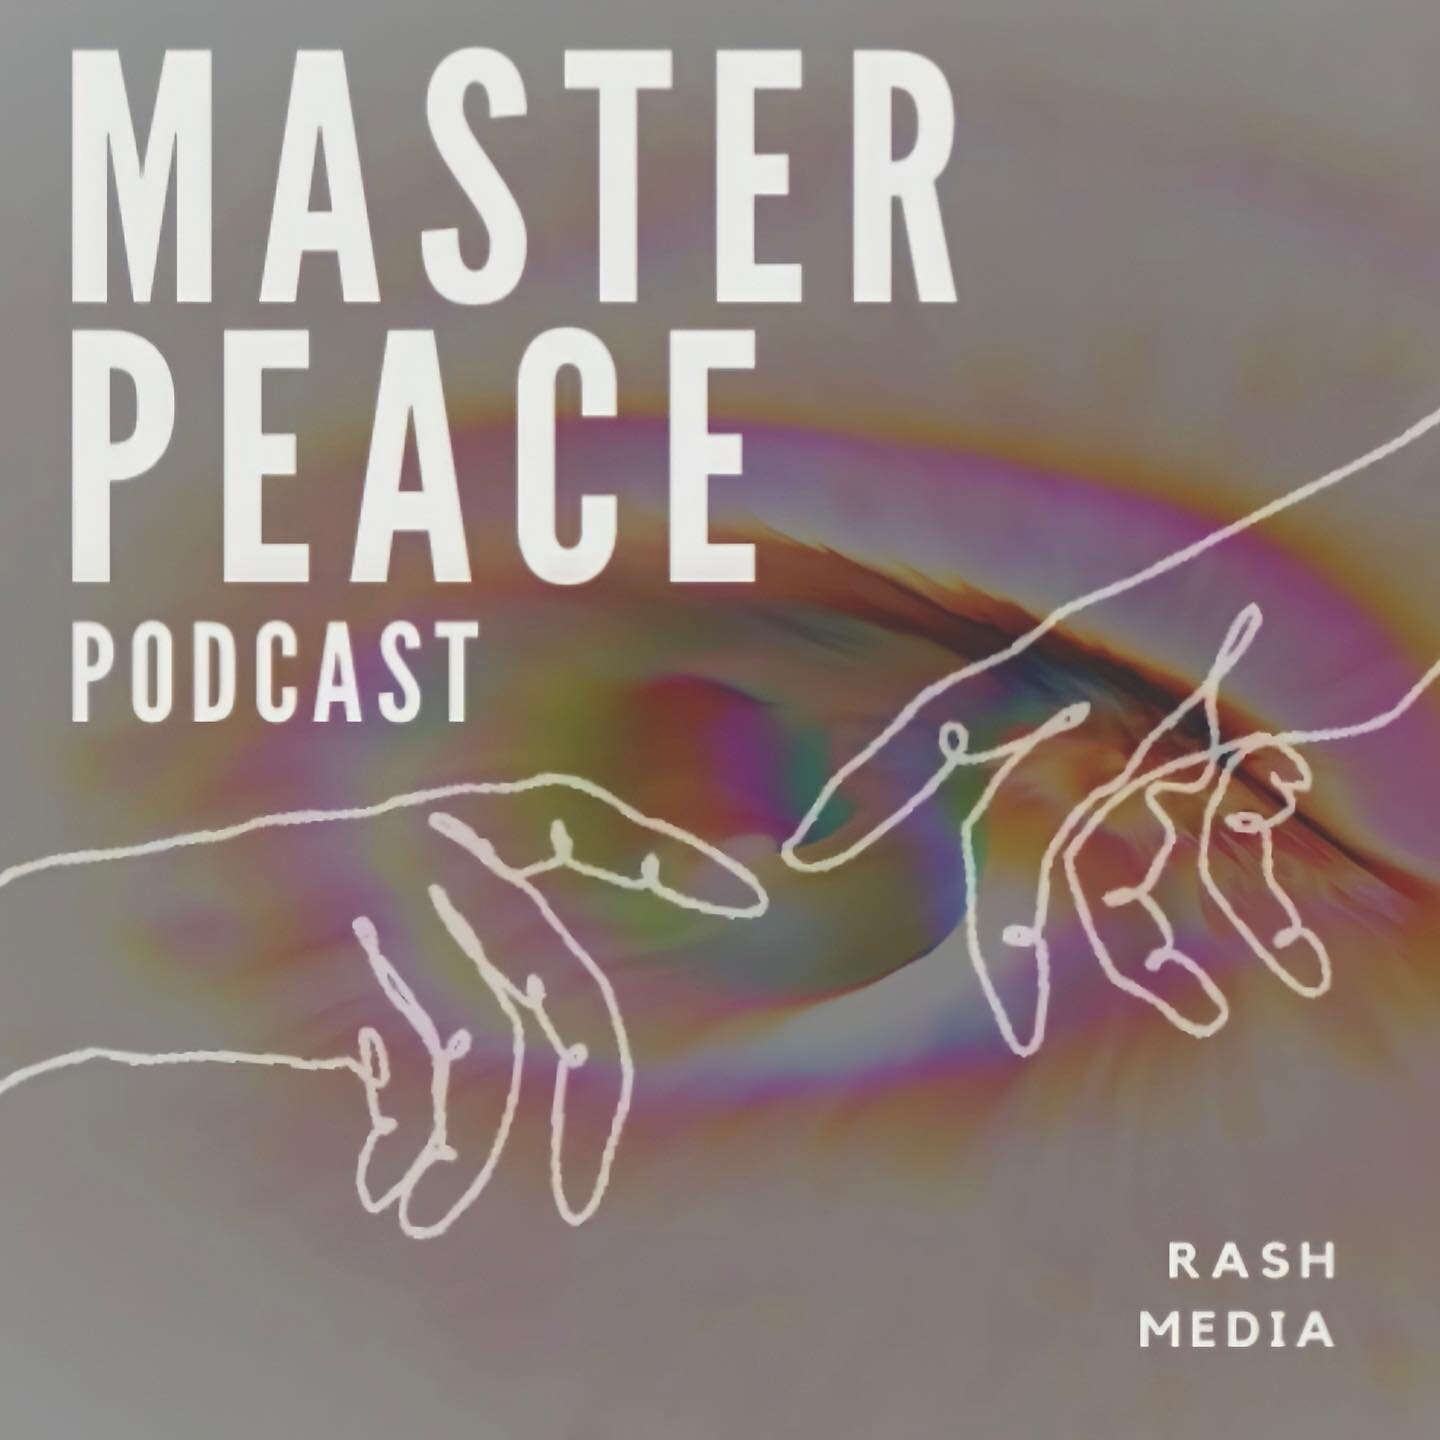 MASTERPEACE is finally out 🤩 Thank you to everyone who has listened so far! We love you more than you can imagine :) link is in bio and send us your email to get on our mailing list 💗 thank you @sushimanemusic @artpluguno and @misshealthysexyboo300